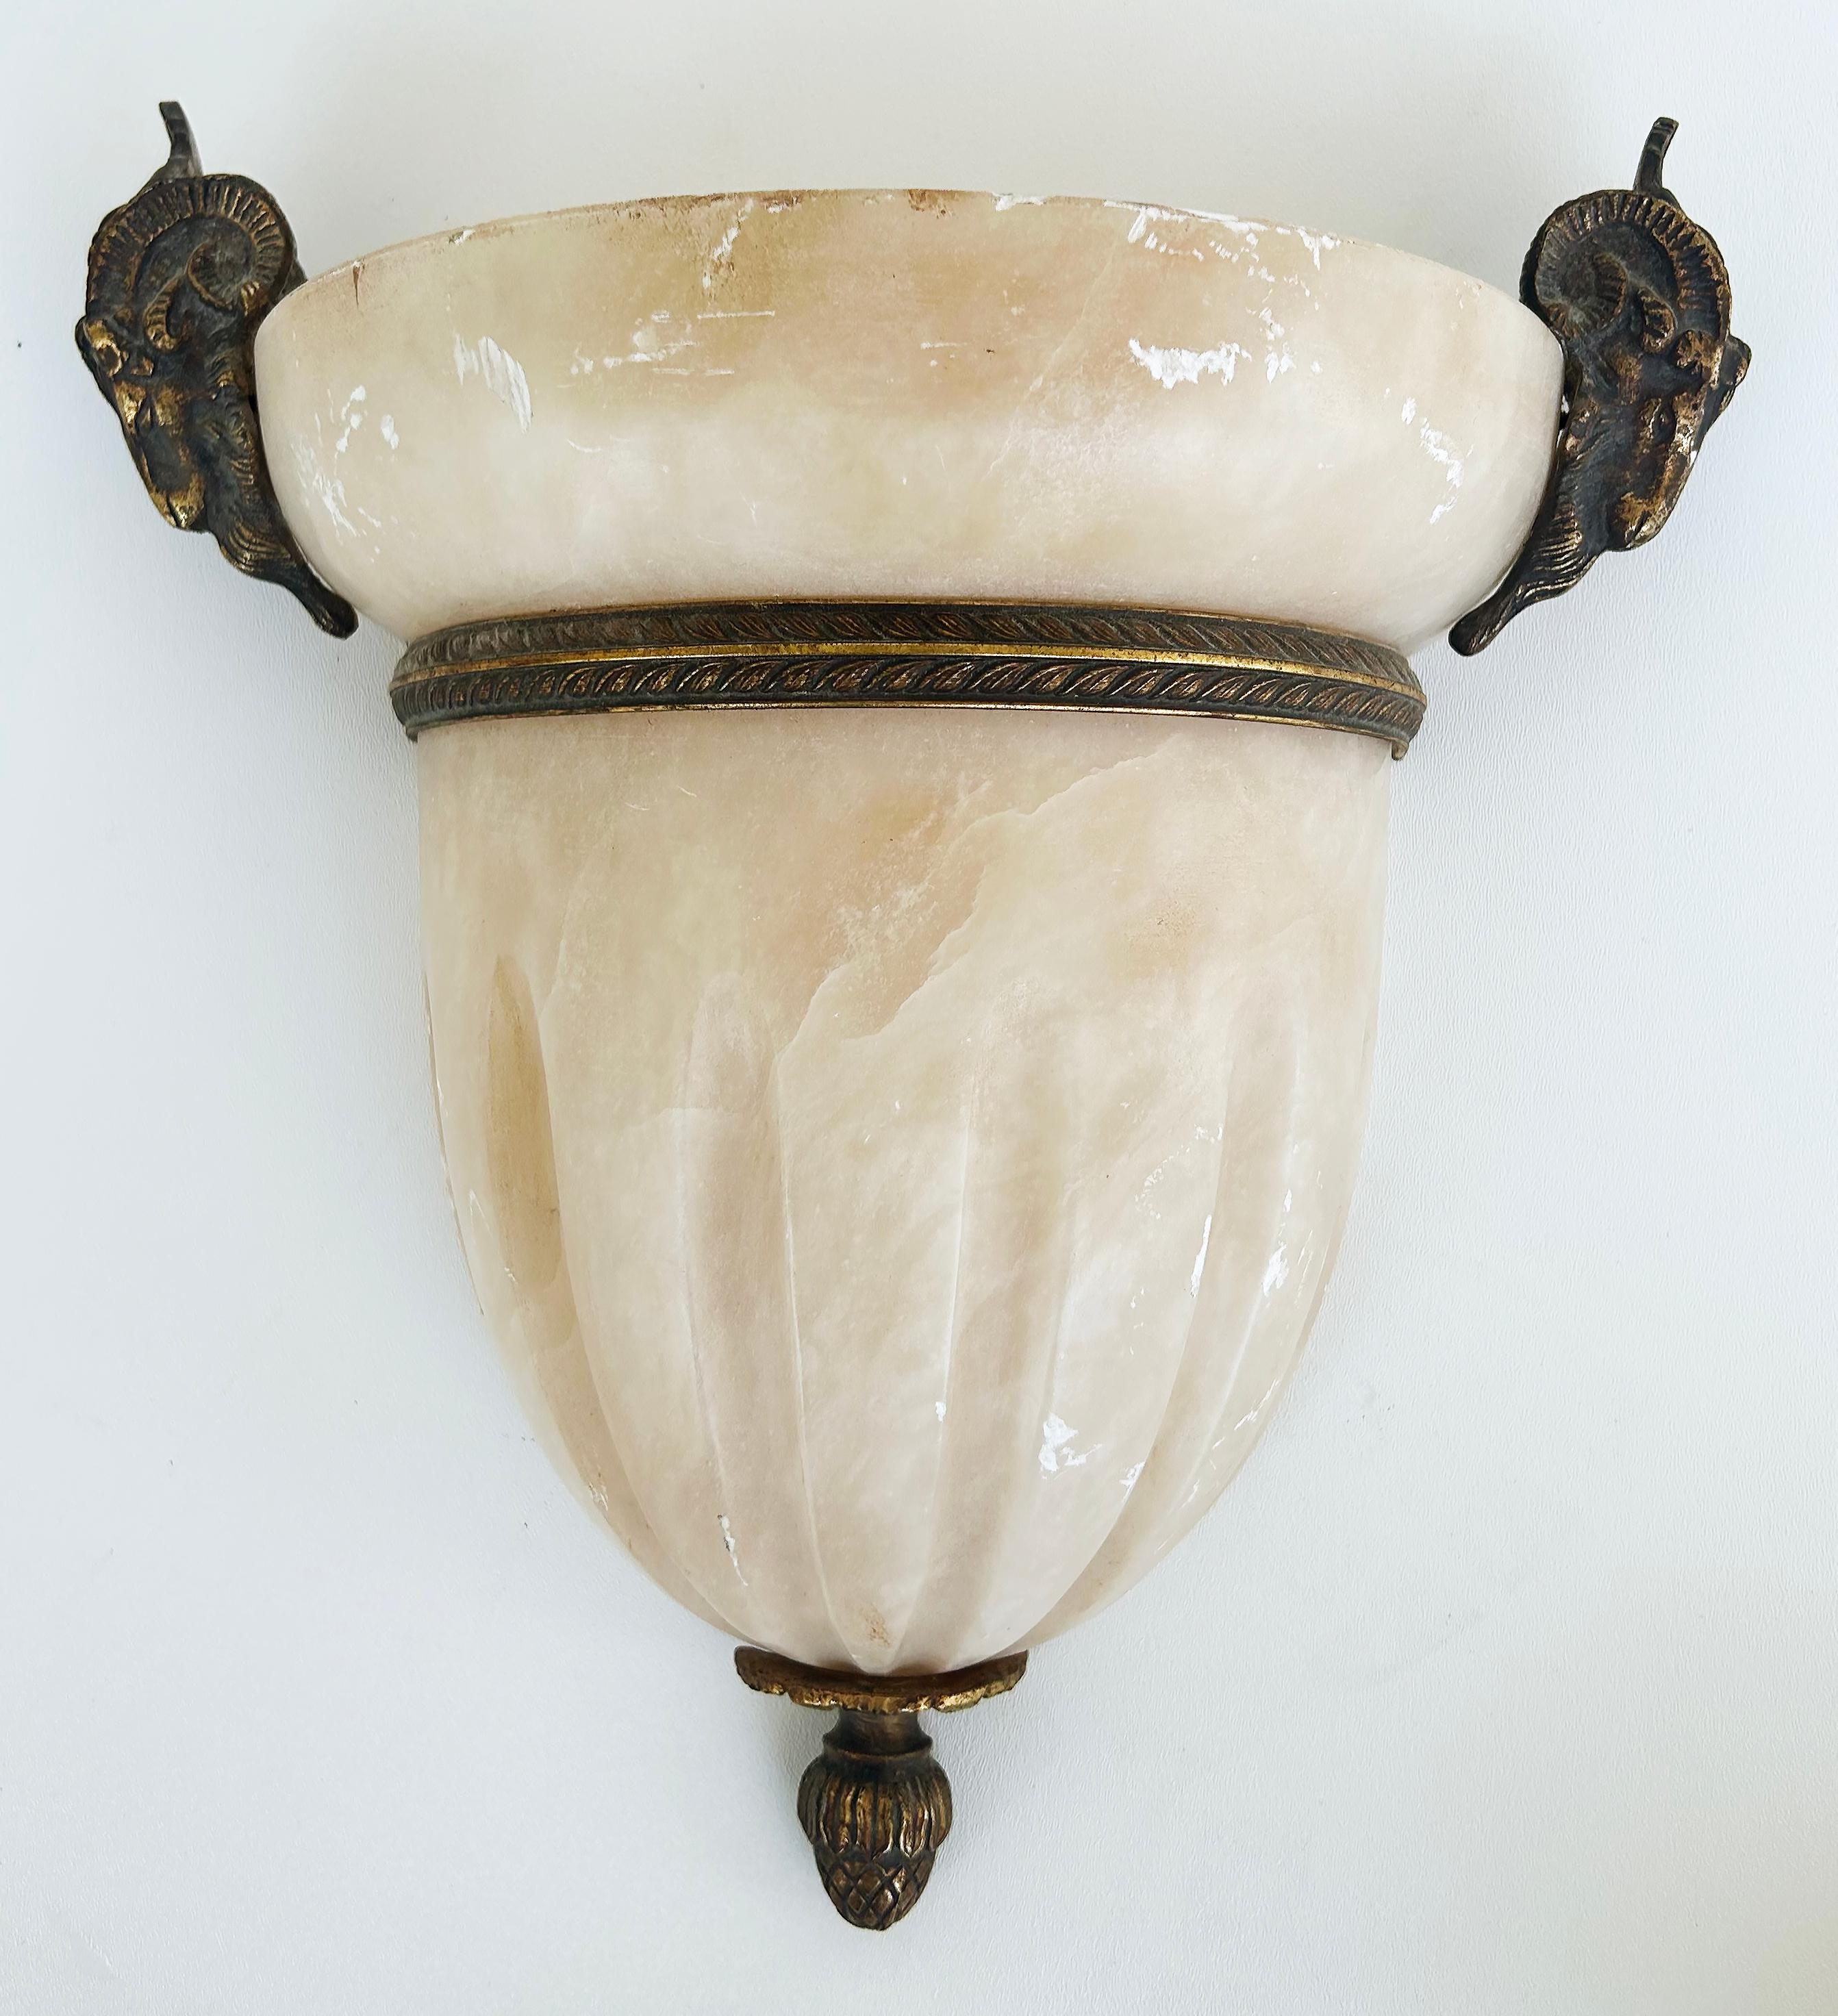 Alabaster Gilt Bronze Ram's Head Wall Sconces by Mariner, S.A., Spain, Pair

Offered for sale is a pair of alabaster and gilt bronze wall sconces made in Spain by Mariner, S.A.  This wonderful neoclassical pair of wall mounted sconces are